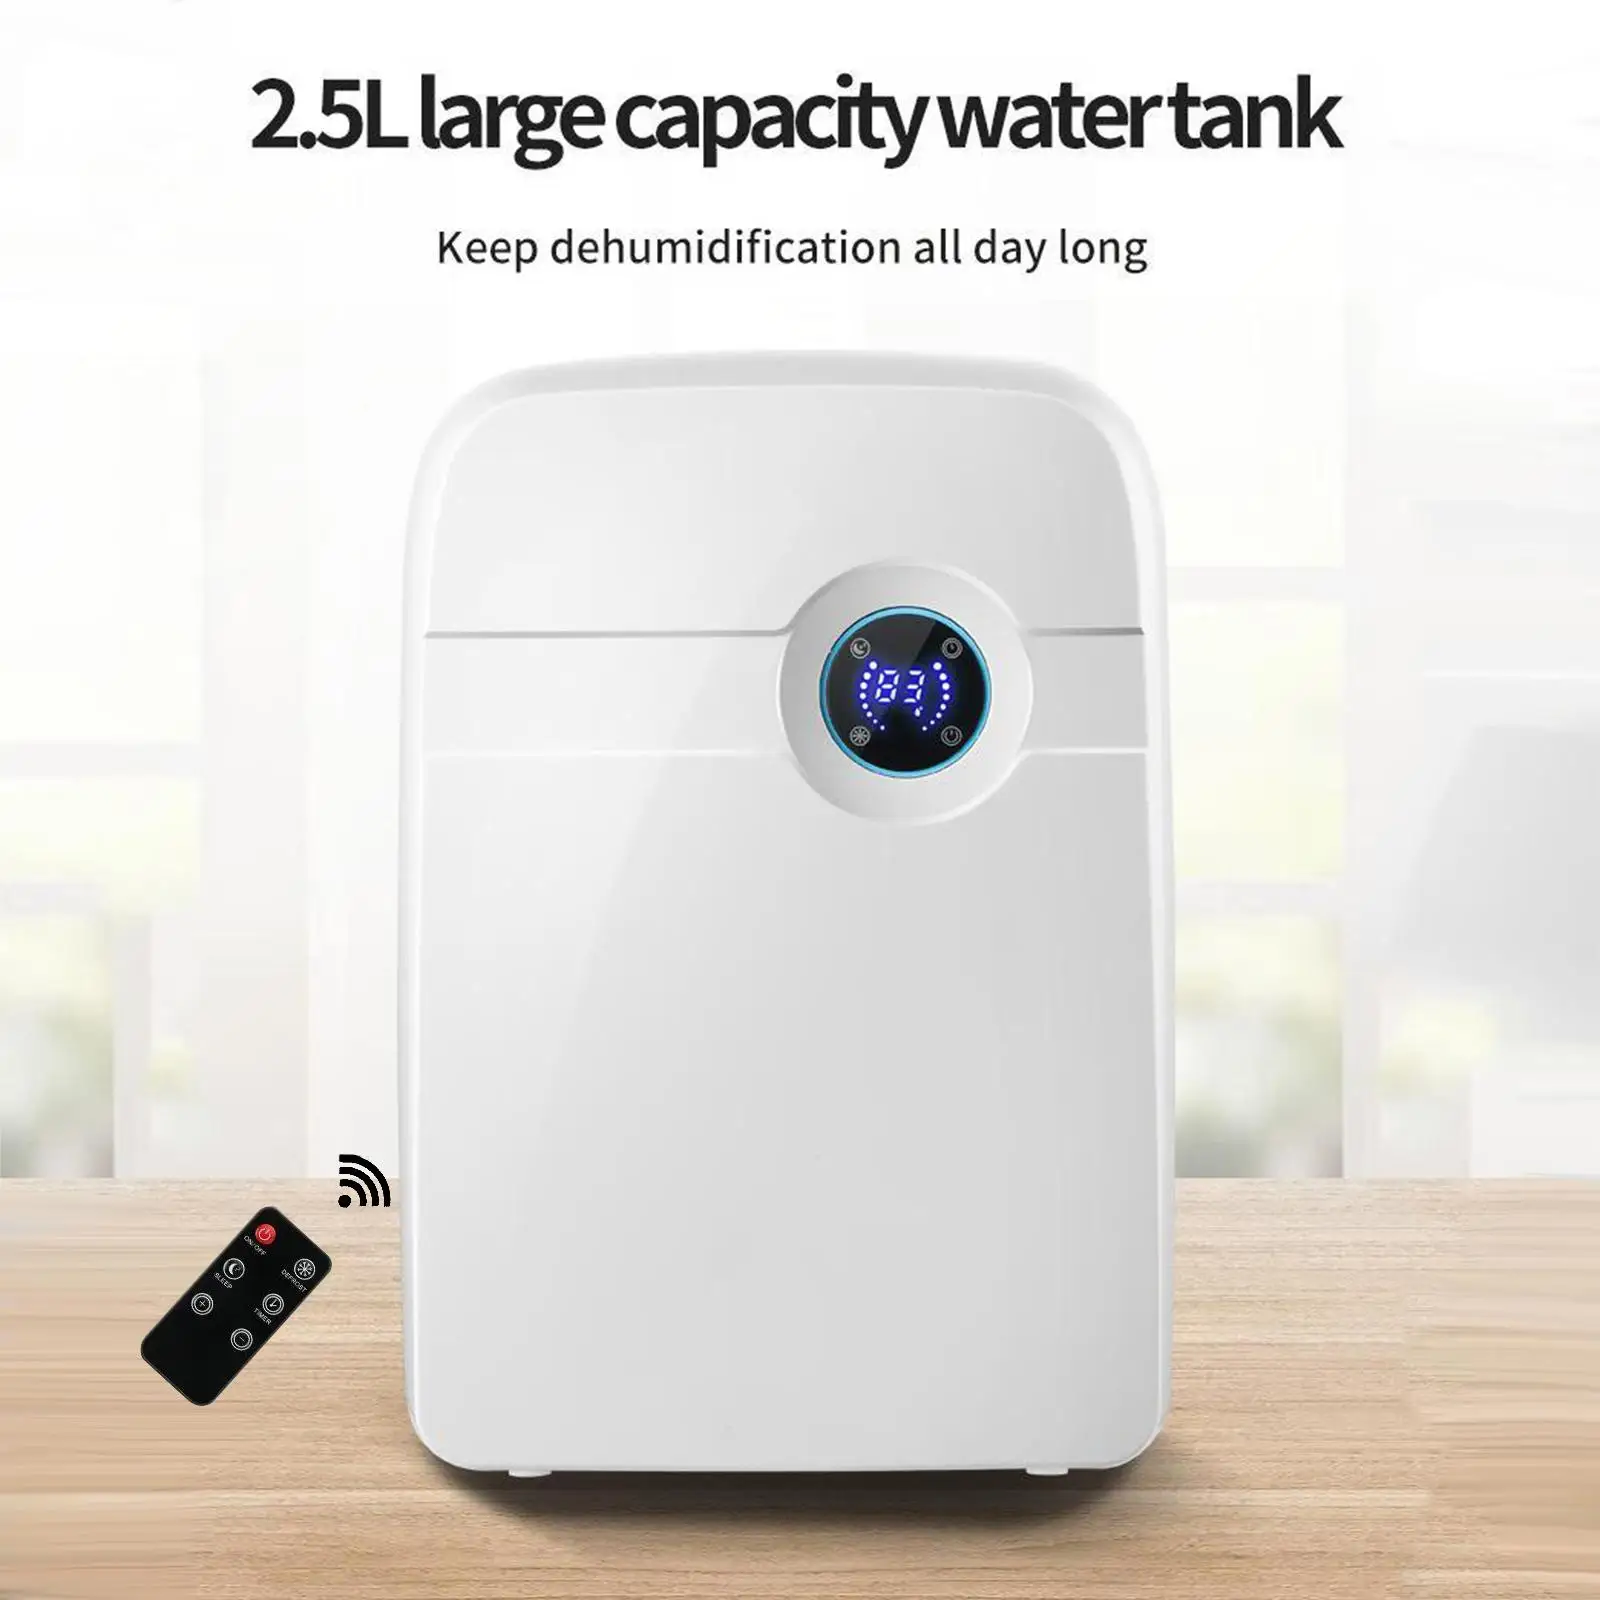 Portable Electric Dehumidifier & 2.5L Water Tank for Home Bathroom 